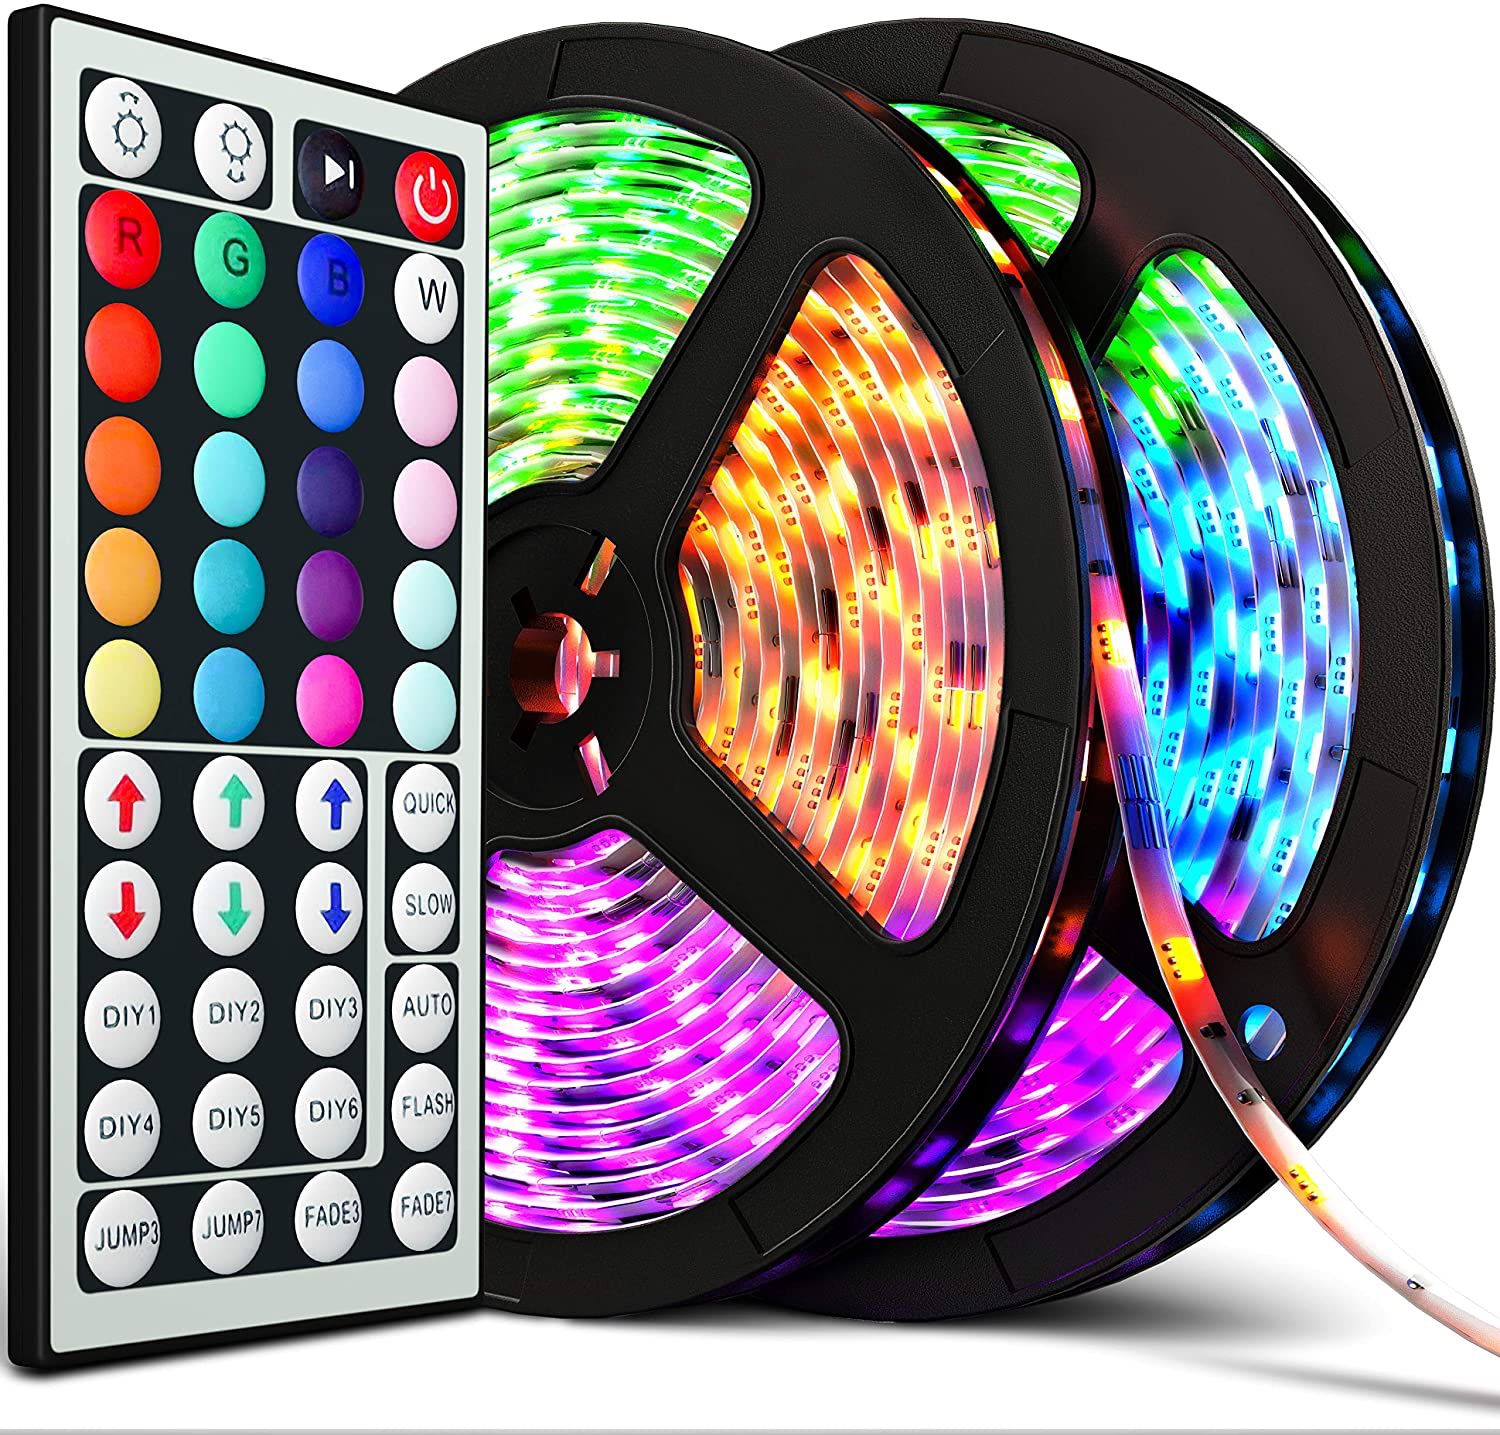 (NEW) $15 DAYBETTER Led Strip Lights 32.8ft Flexible Tape 5050 RGB 300 Color Changing Kit (44 Key Remote) 